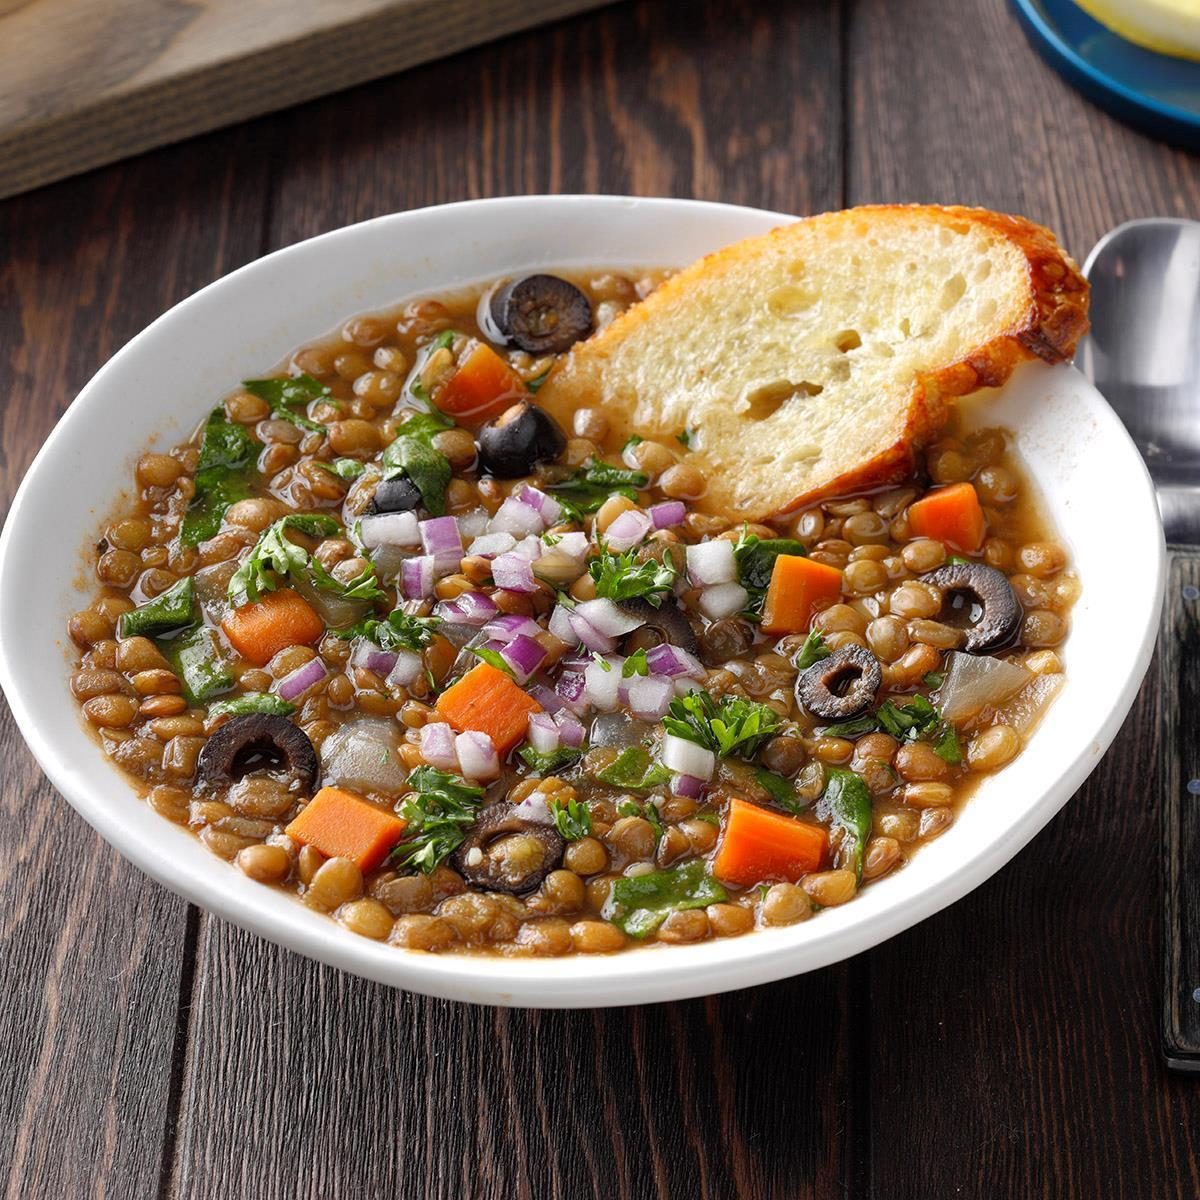 Greek-Style Lentil Soup Recipe: How to Make It